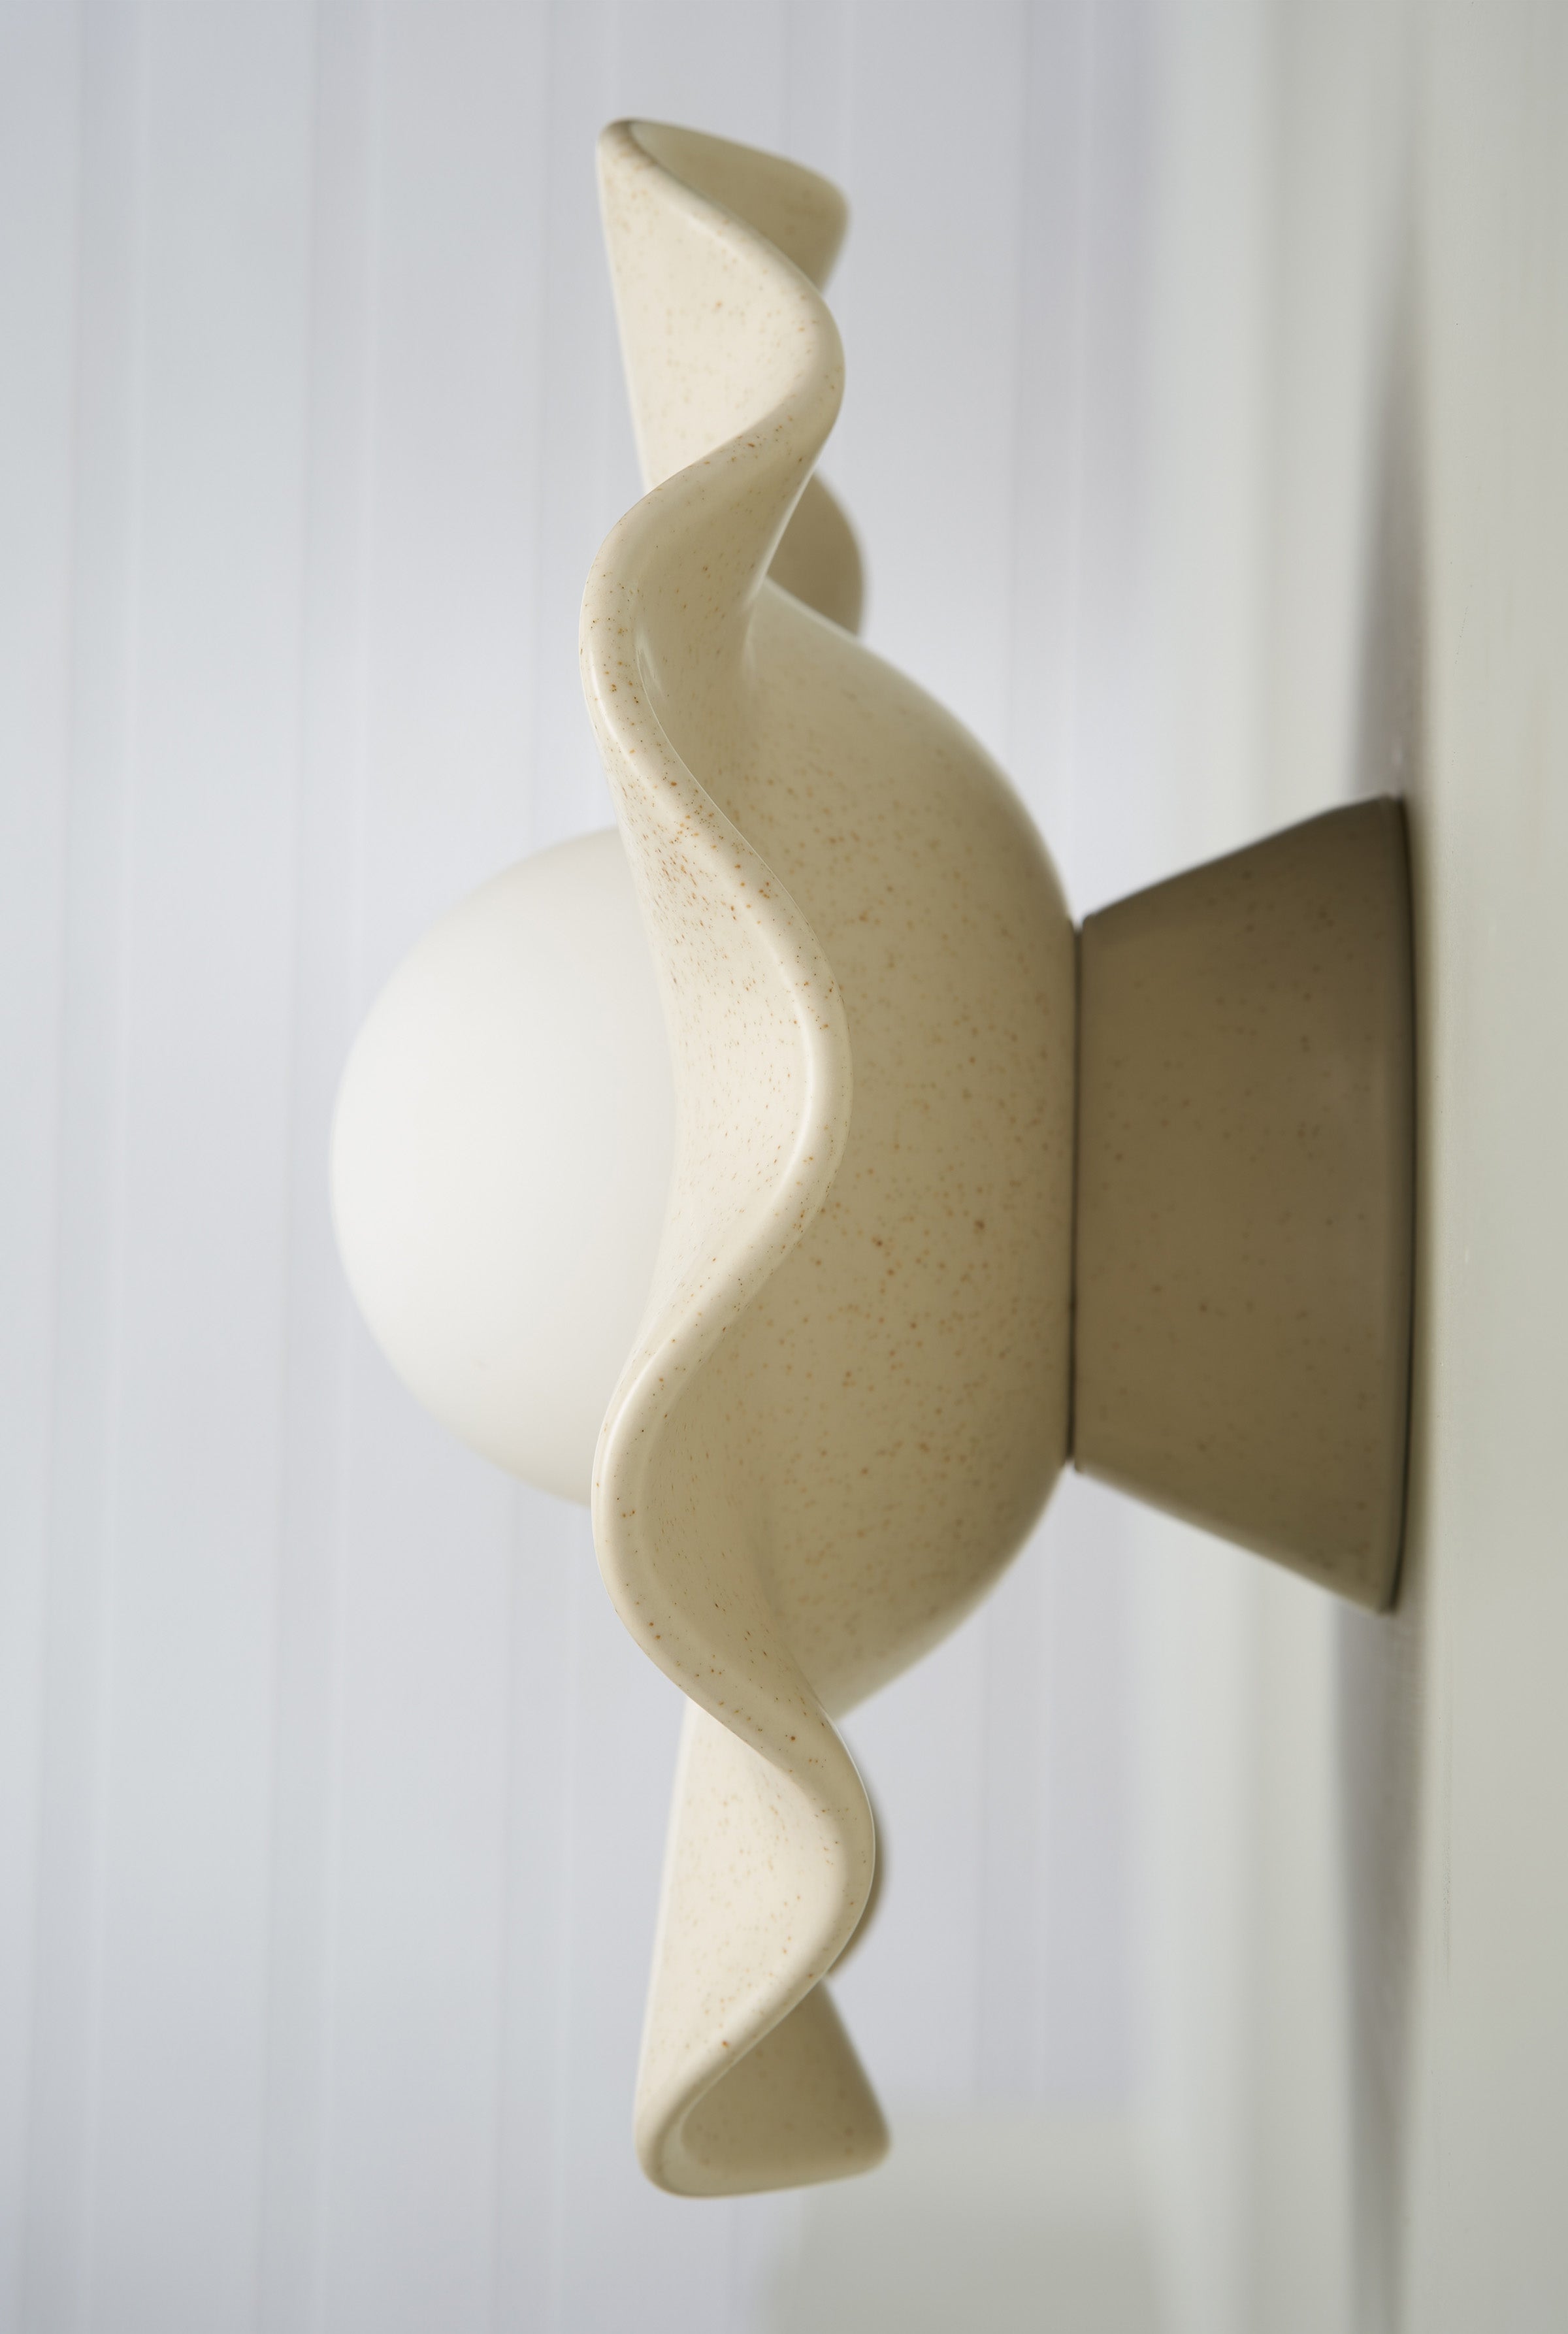 Ceramic Wall Pearl Sconce Light